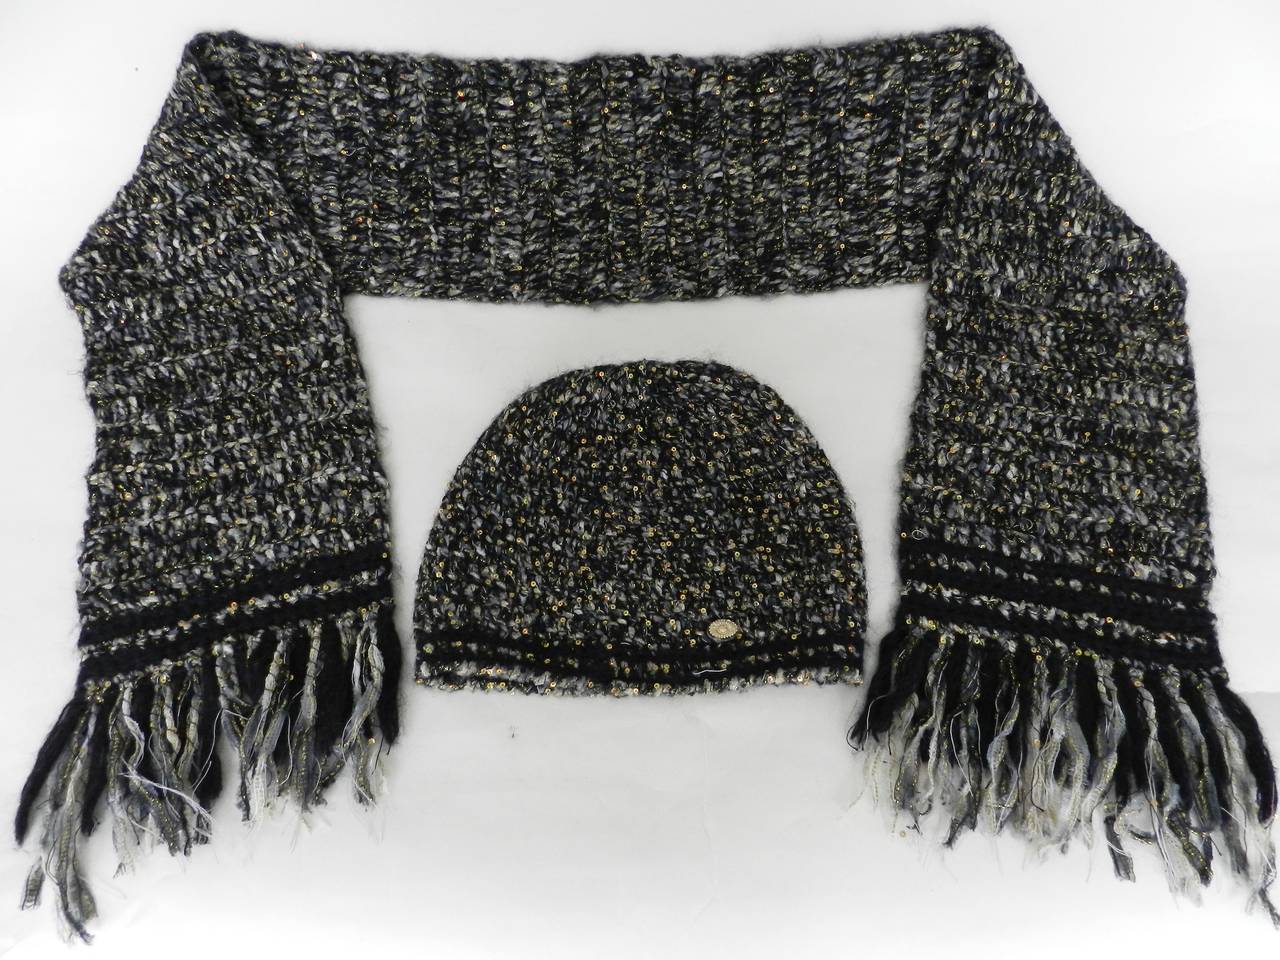 Chanel 2009 Fall/winter scarf and hat set. Main colors are black, greyish taupe, and irridescent gold sequins. Excellent condition. Scarf is 7